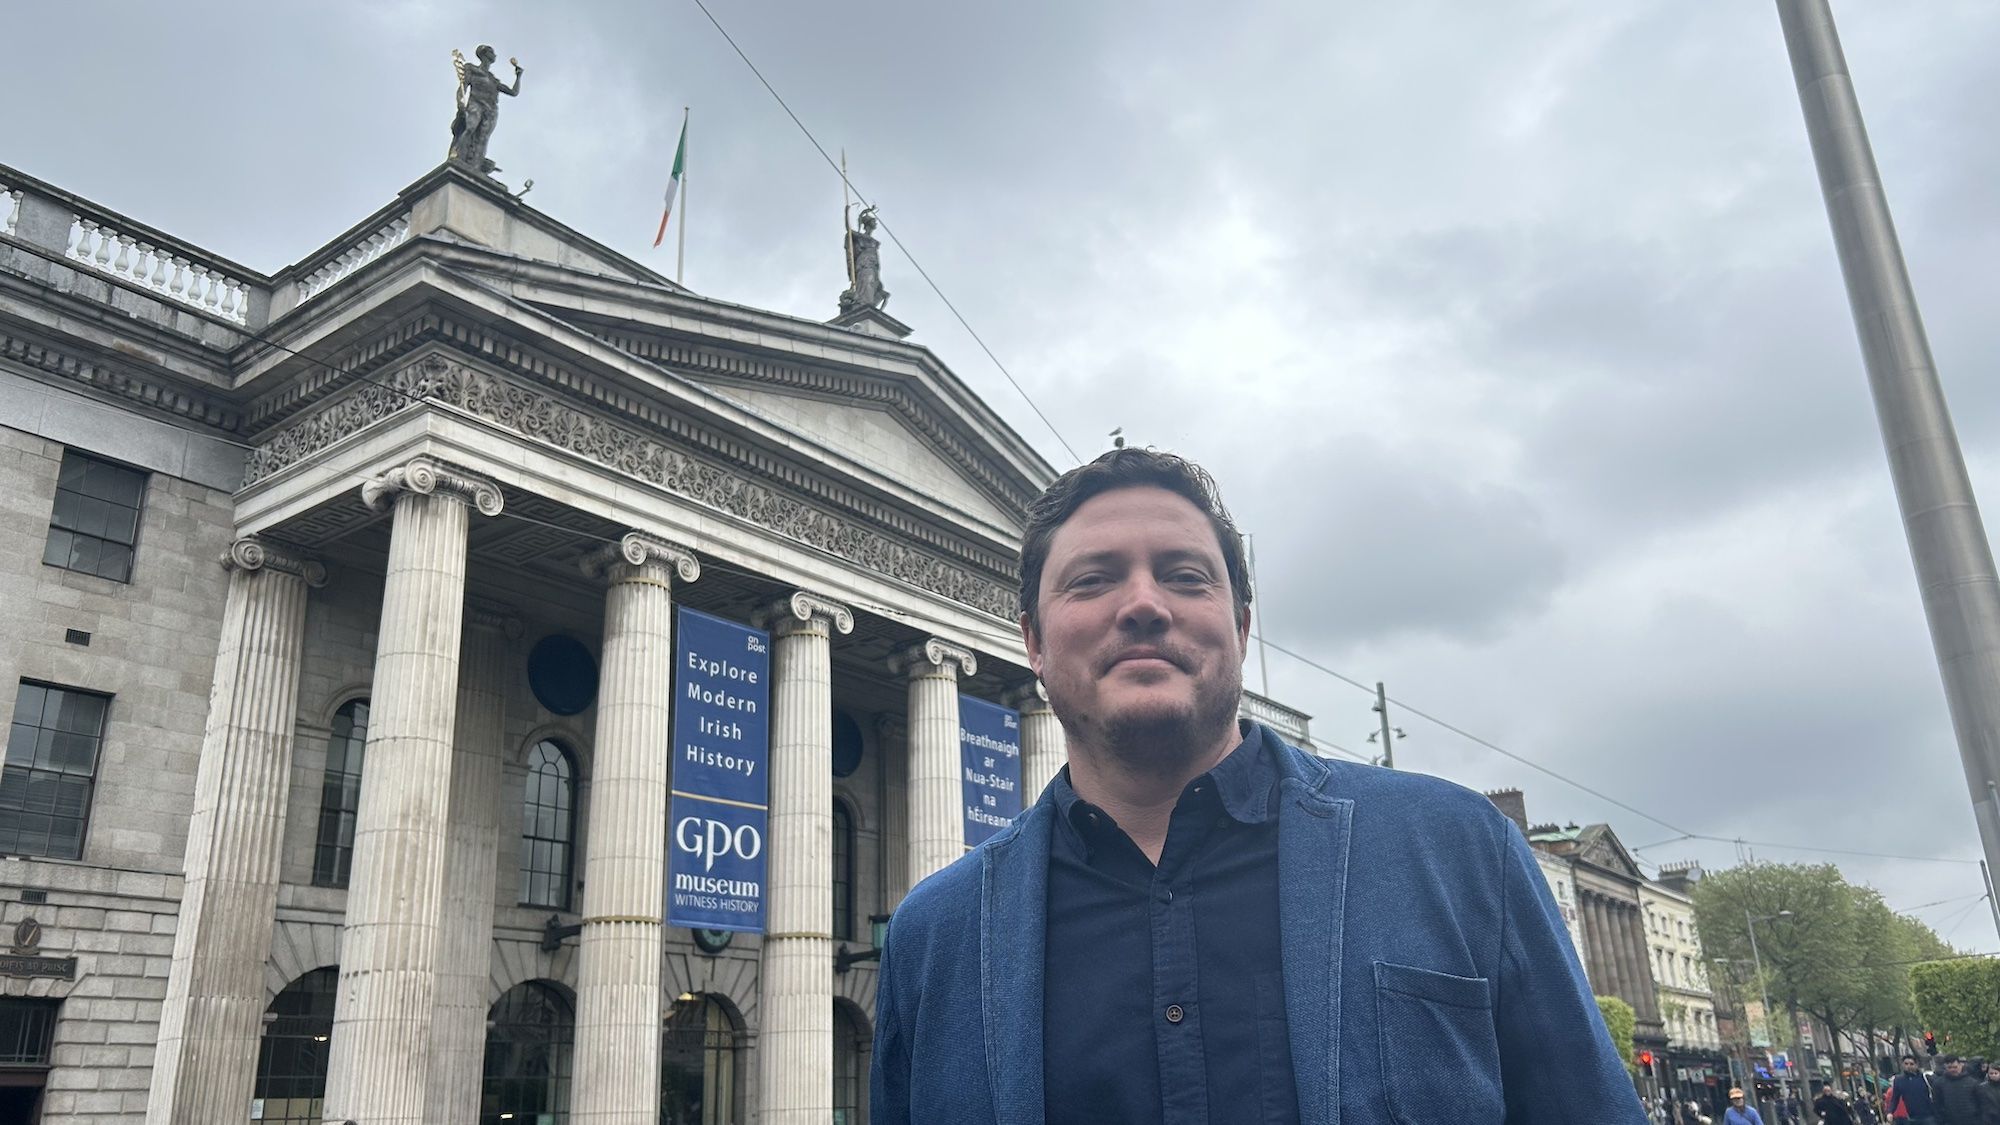 SITE OF STRUGGLE: Boston architect Michael Murphy outside the GPO on O\'Connell Street, Dublin, today - the 108th anniversary of the day the Rising started in Dublin